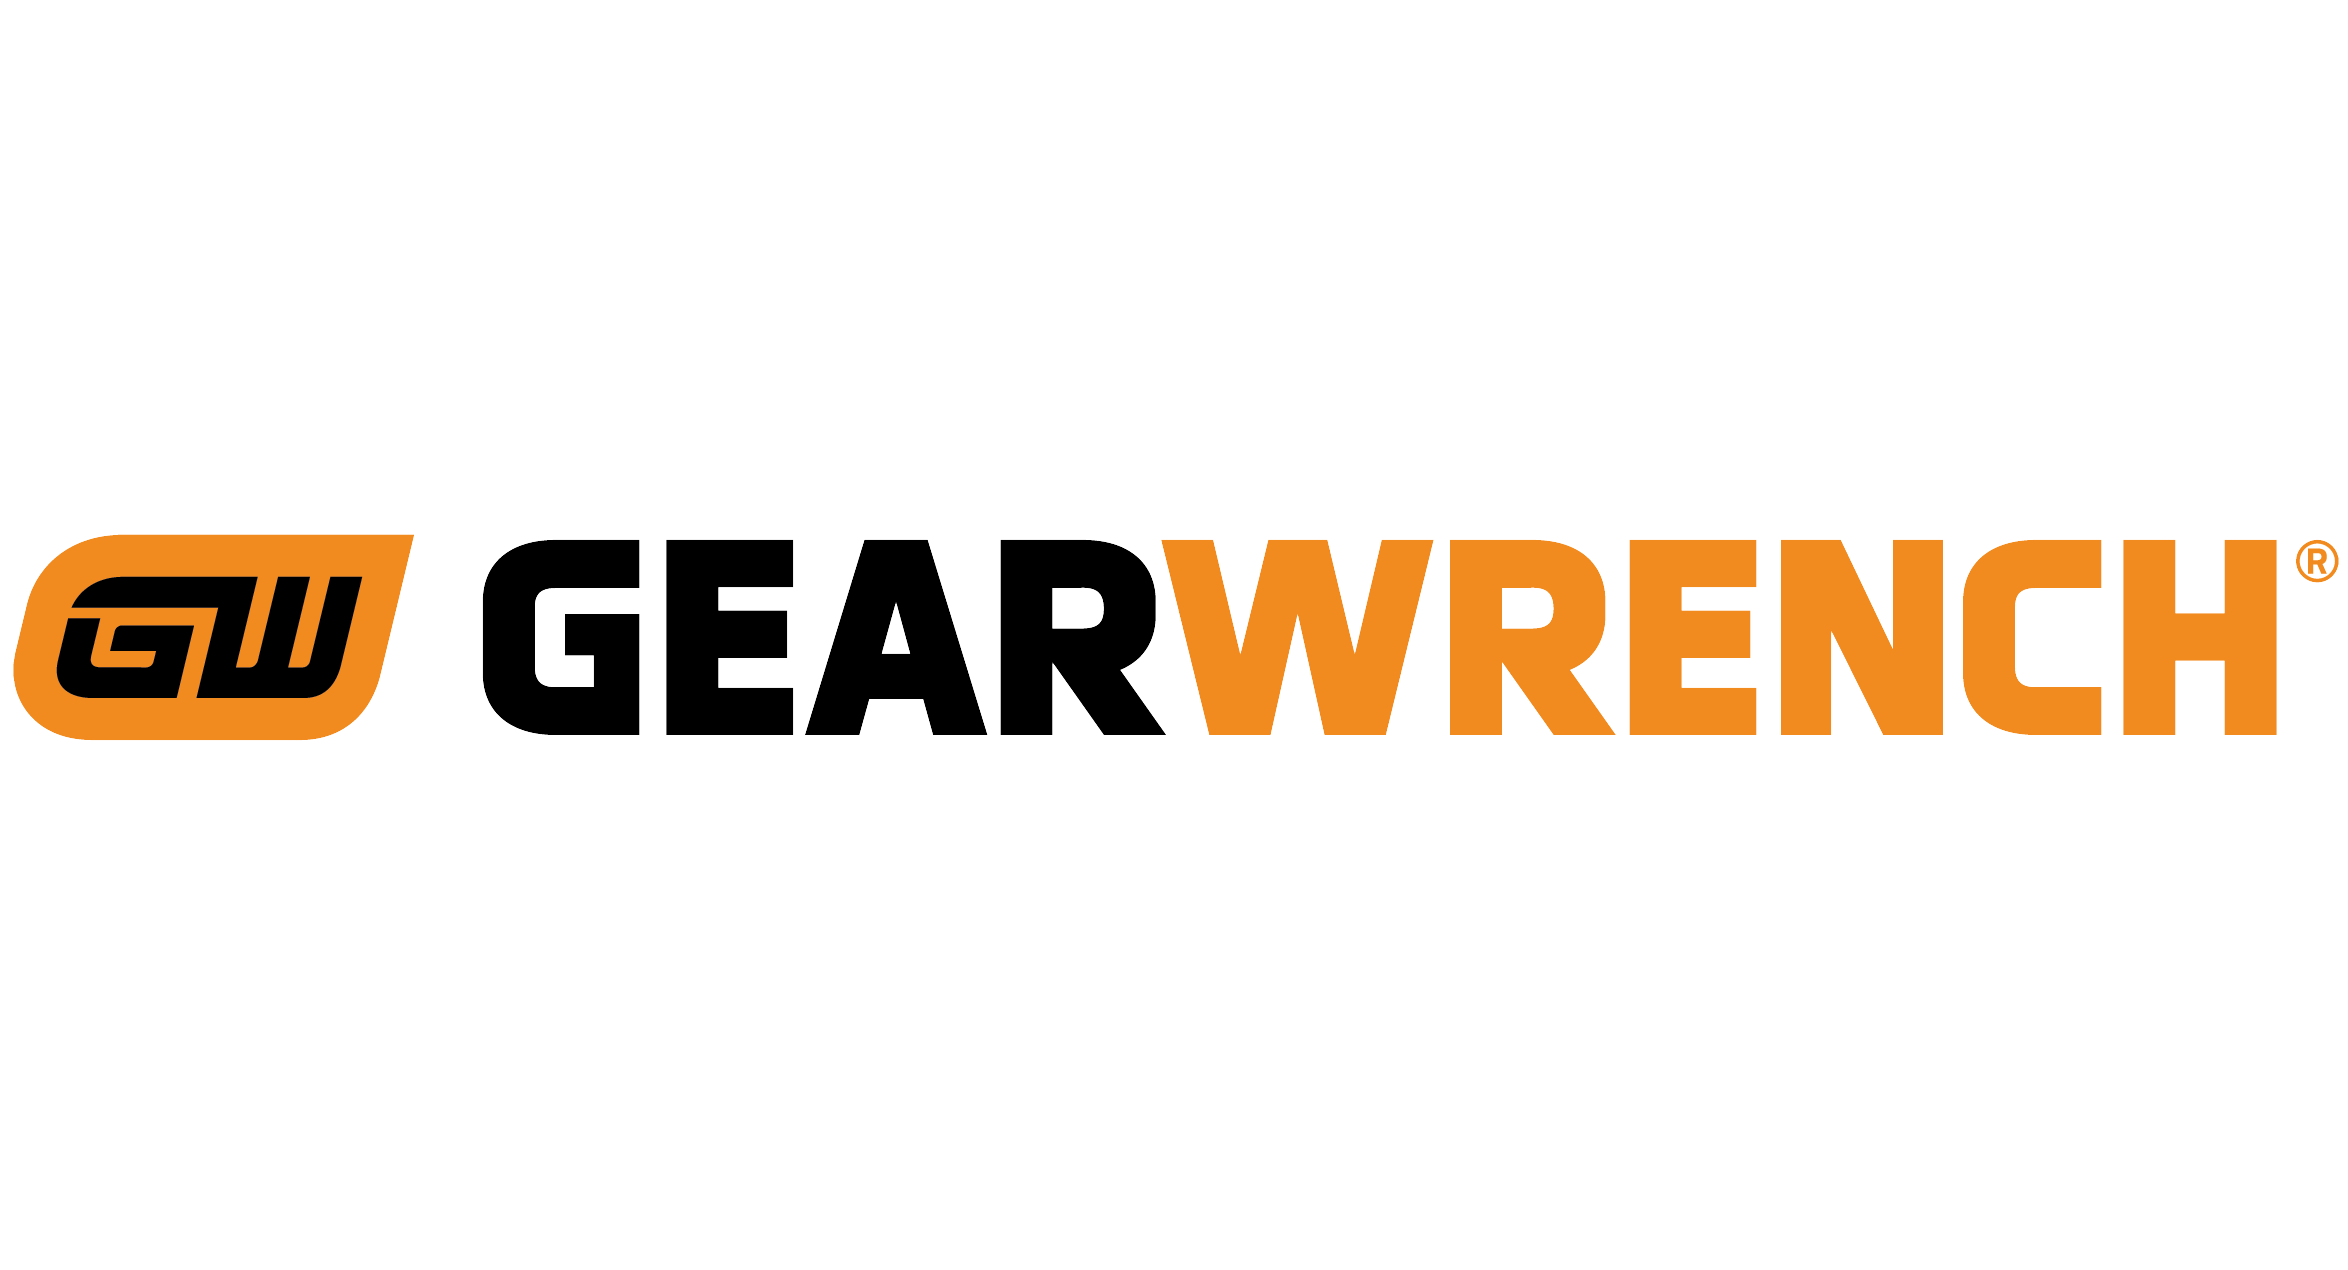 GearWrench Logo - Buy GEARWRENCH Online. GEARWRENCH Hand Tools, Hand Tool Sets